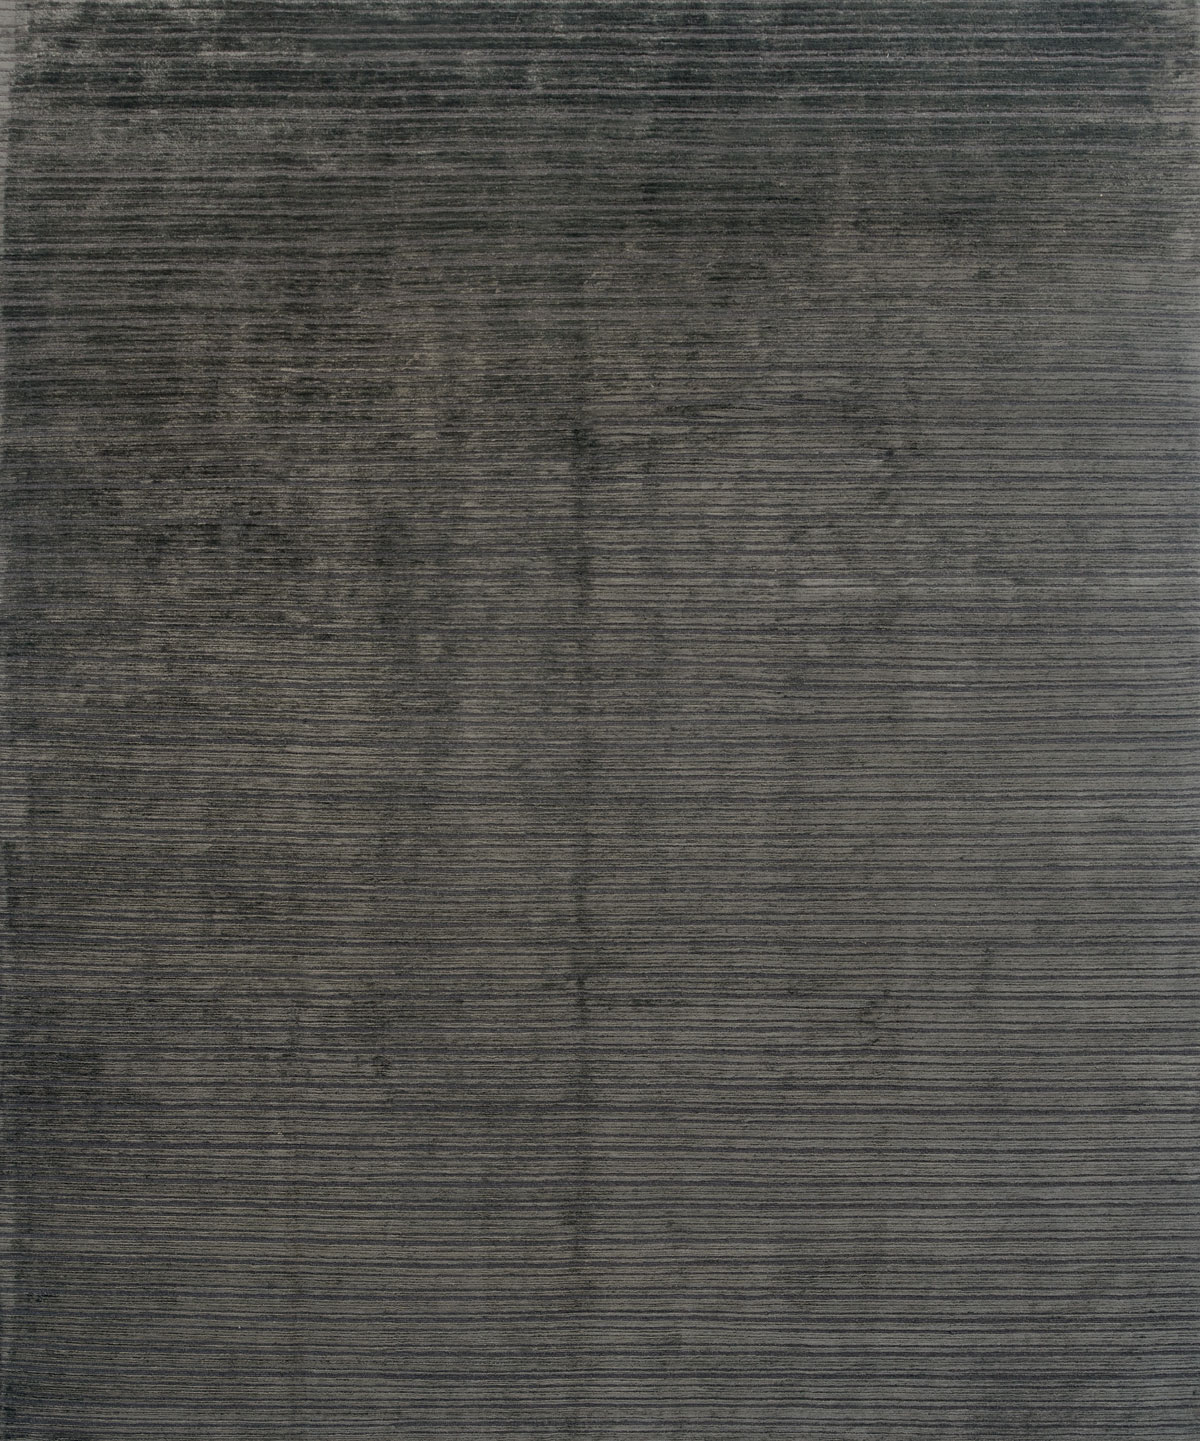 Eccelso Antracite Handknotted Rug ☞ Size: 200 x 300 cm